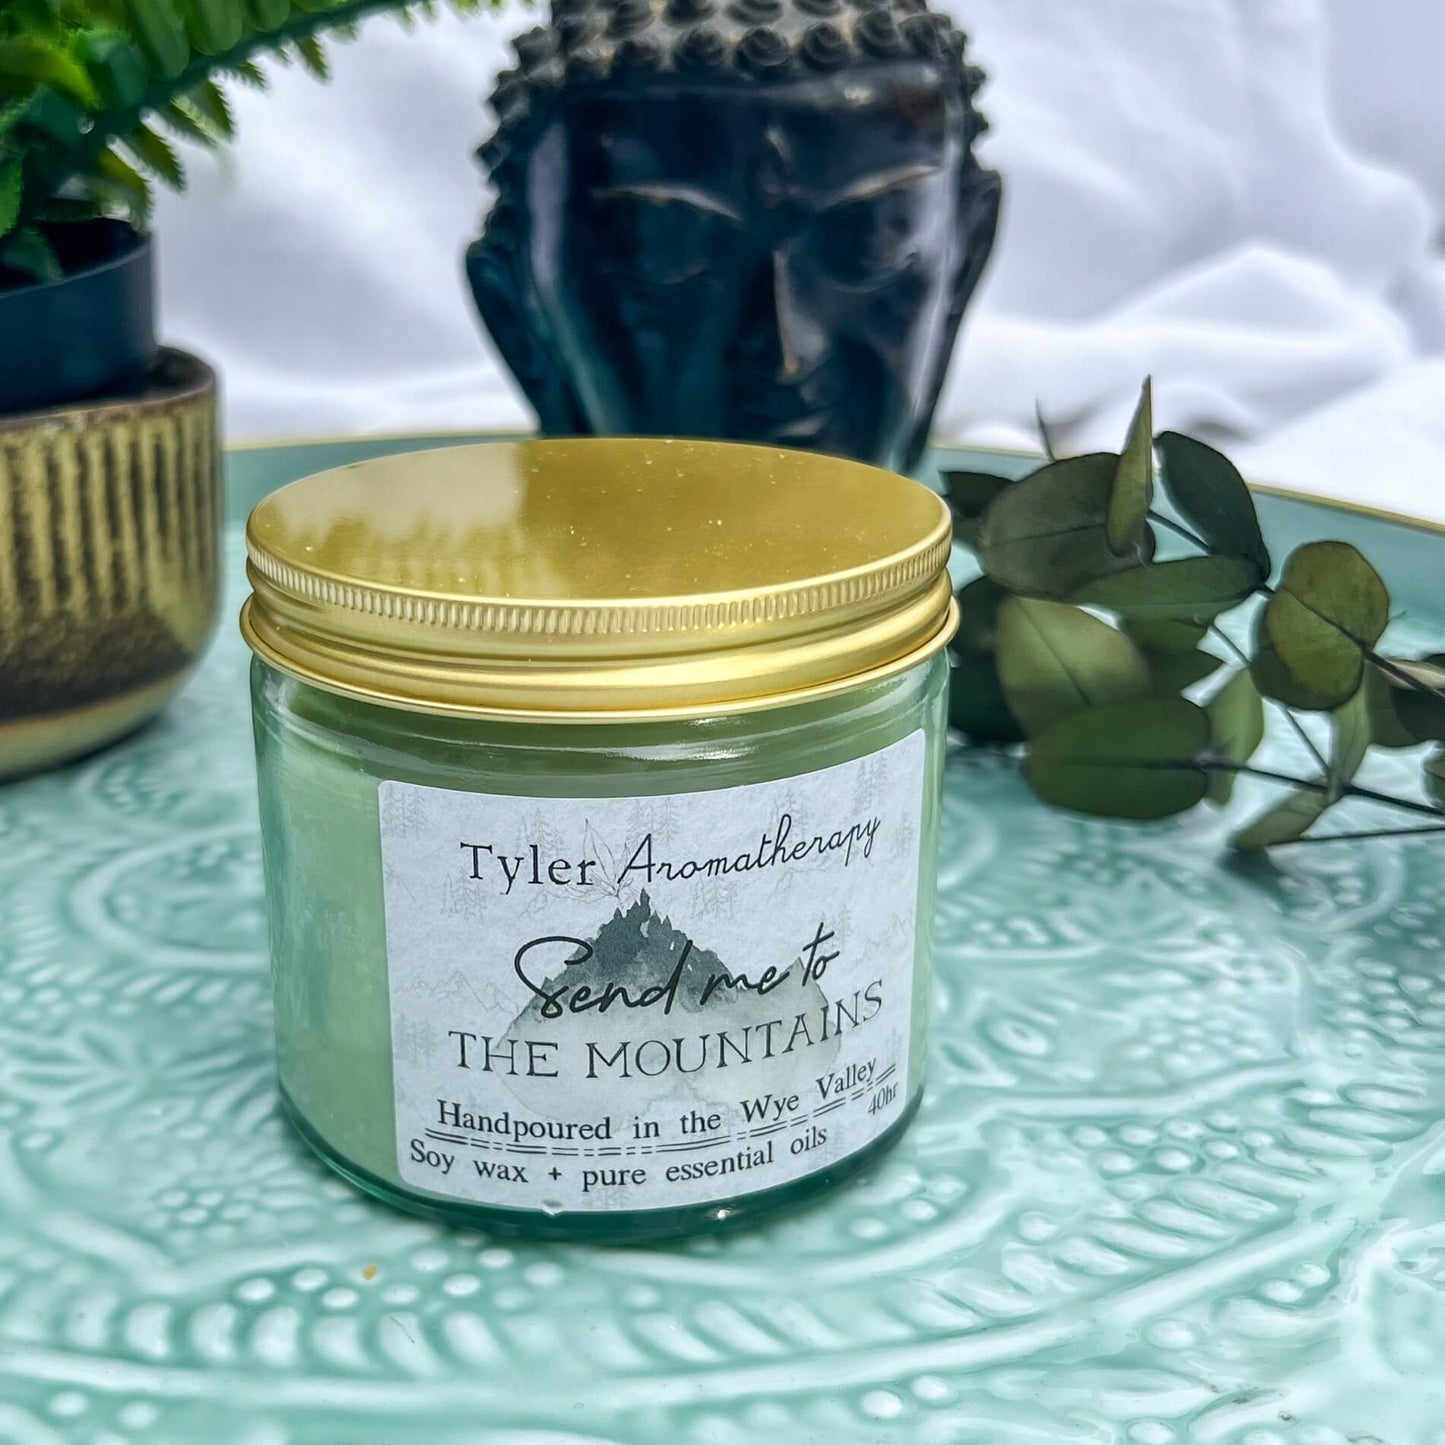 Aromatherapy Candle - The Mountains